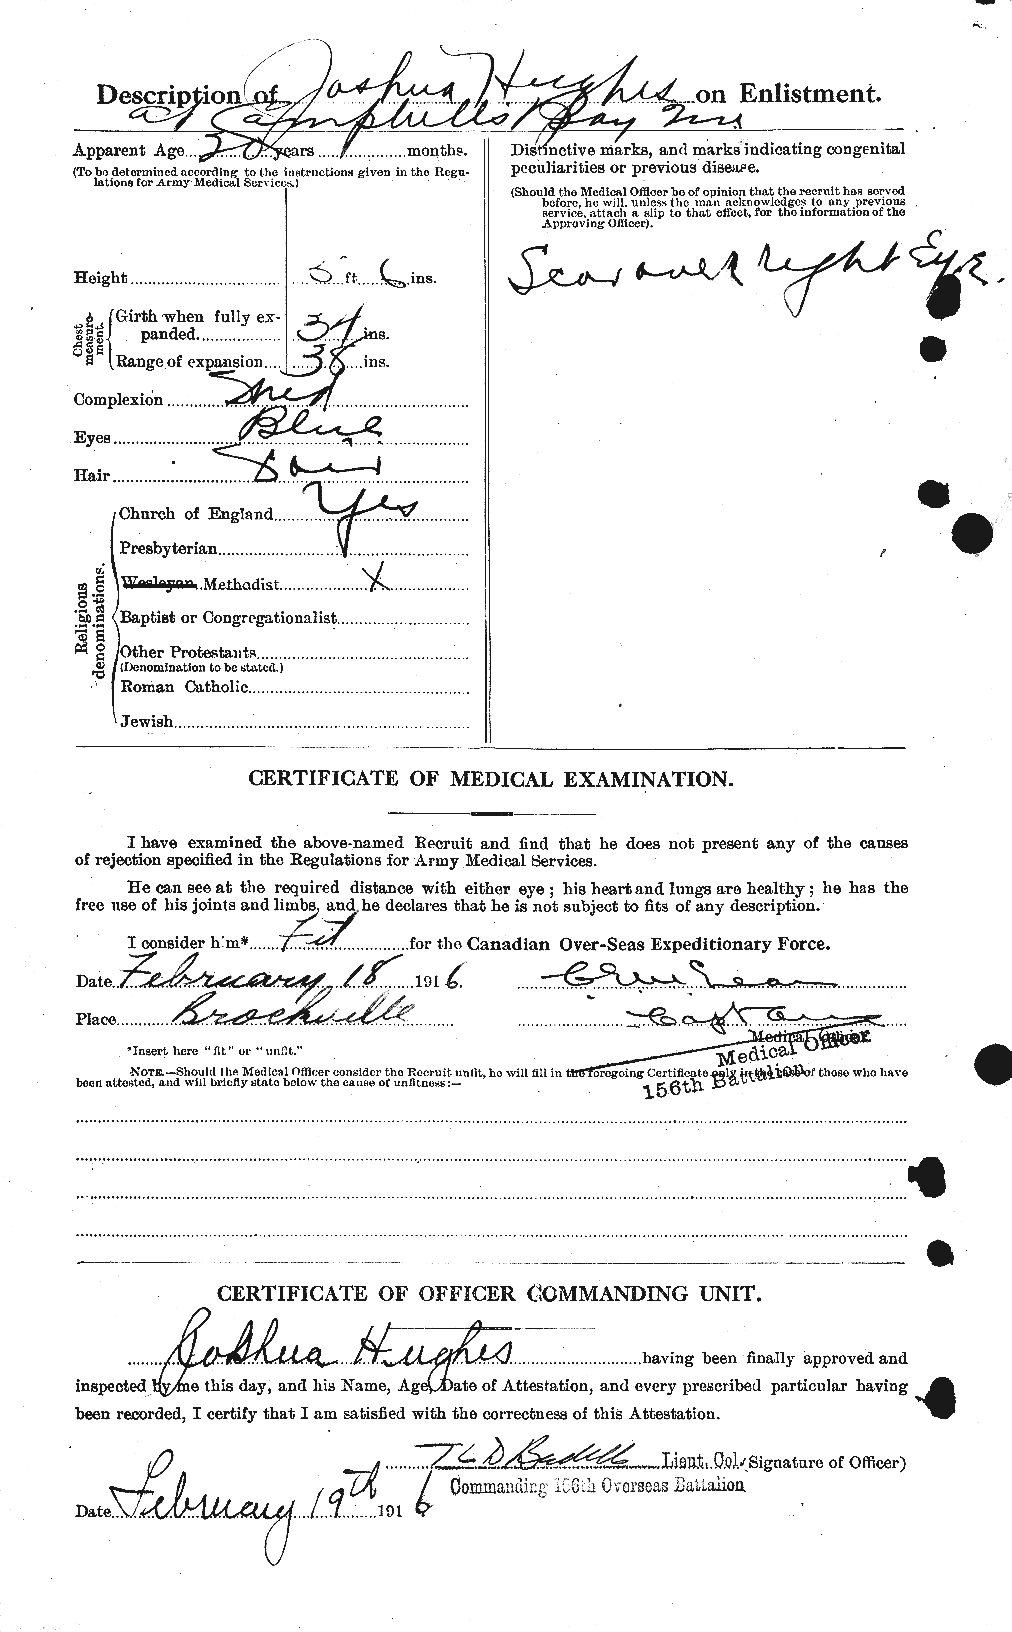 Personnel Records of the First World War - CEF 404090b